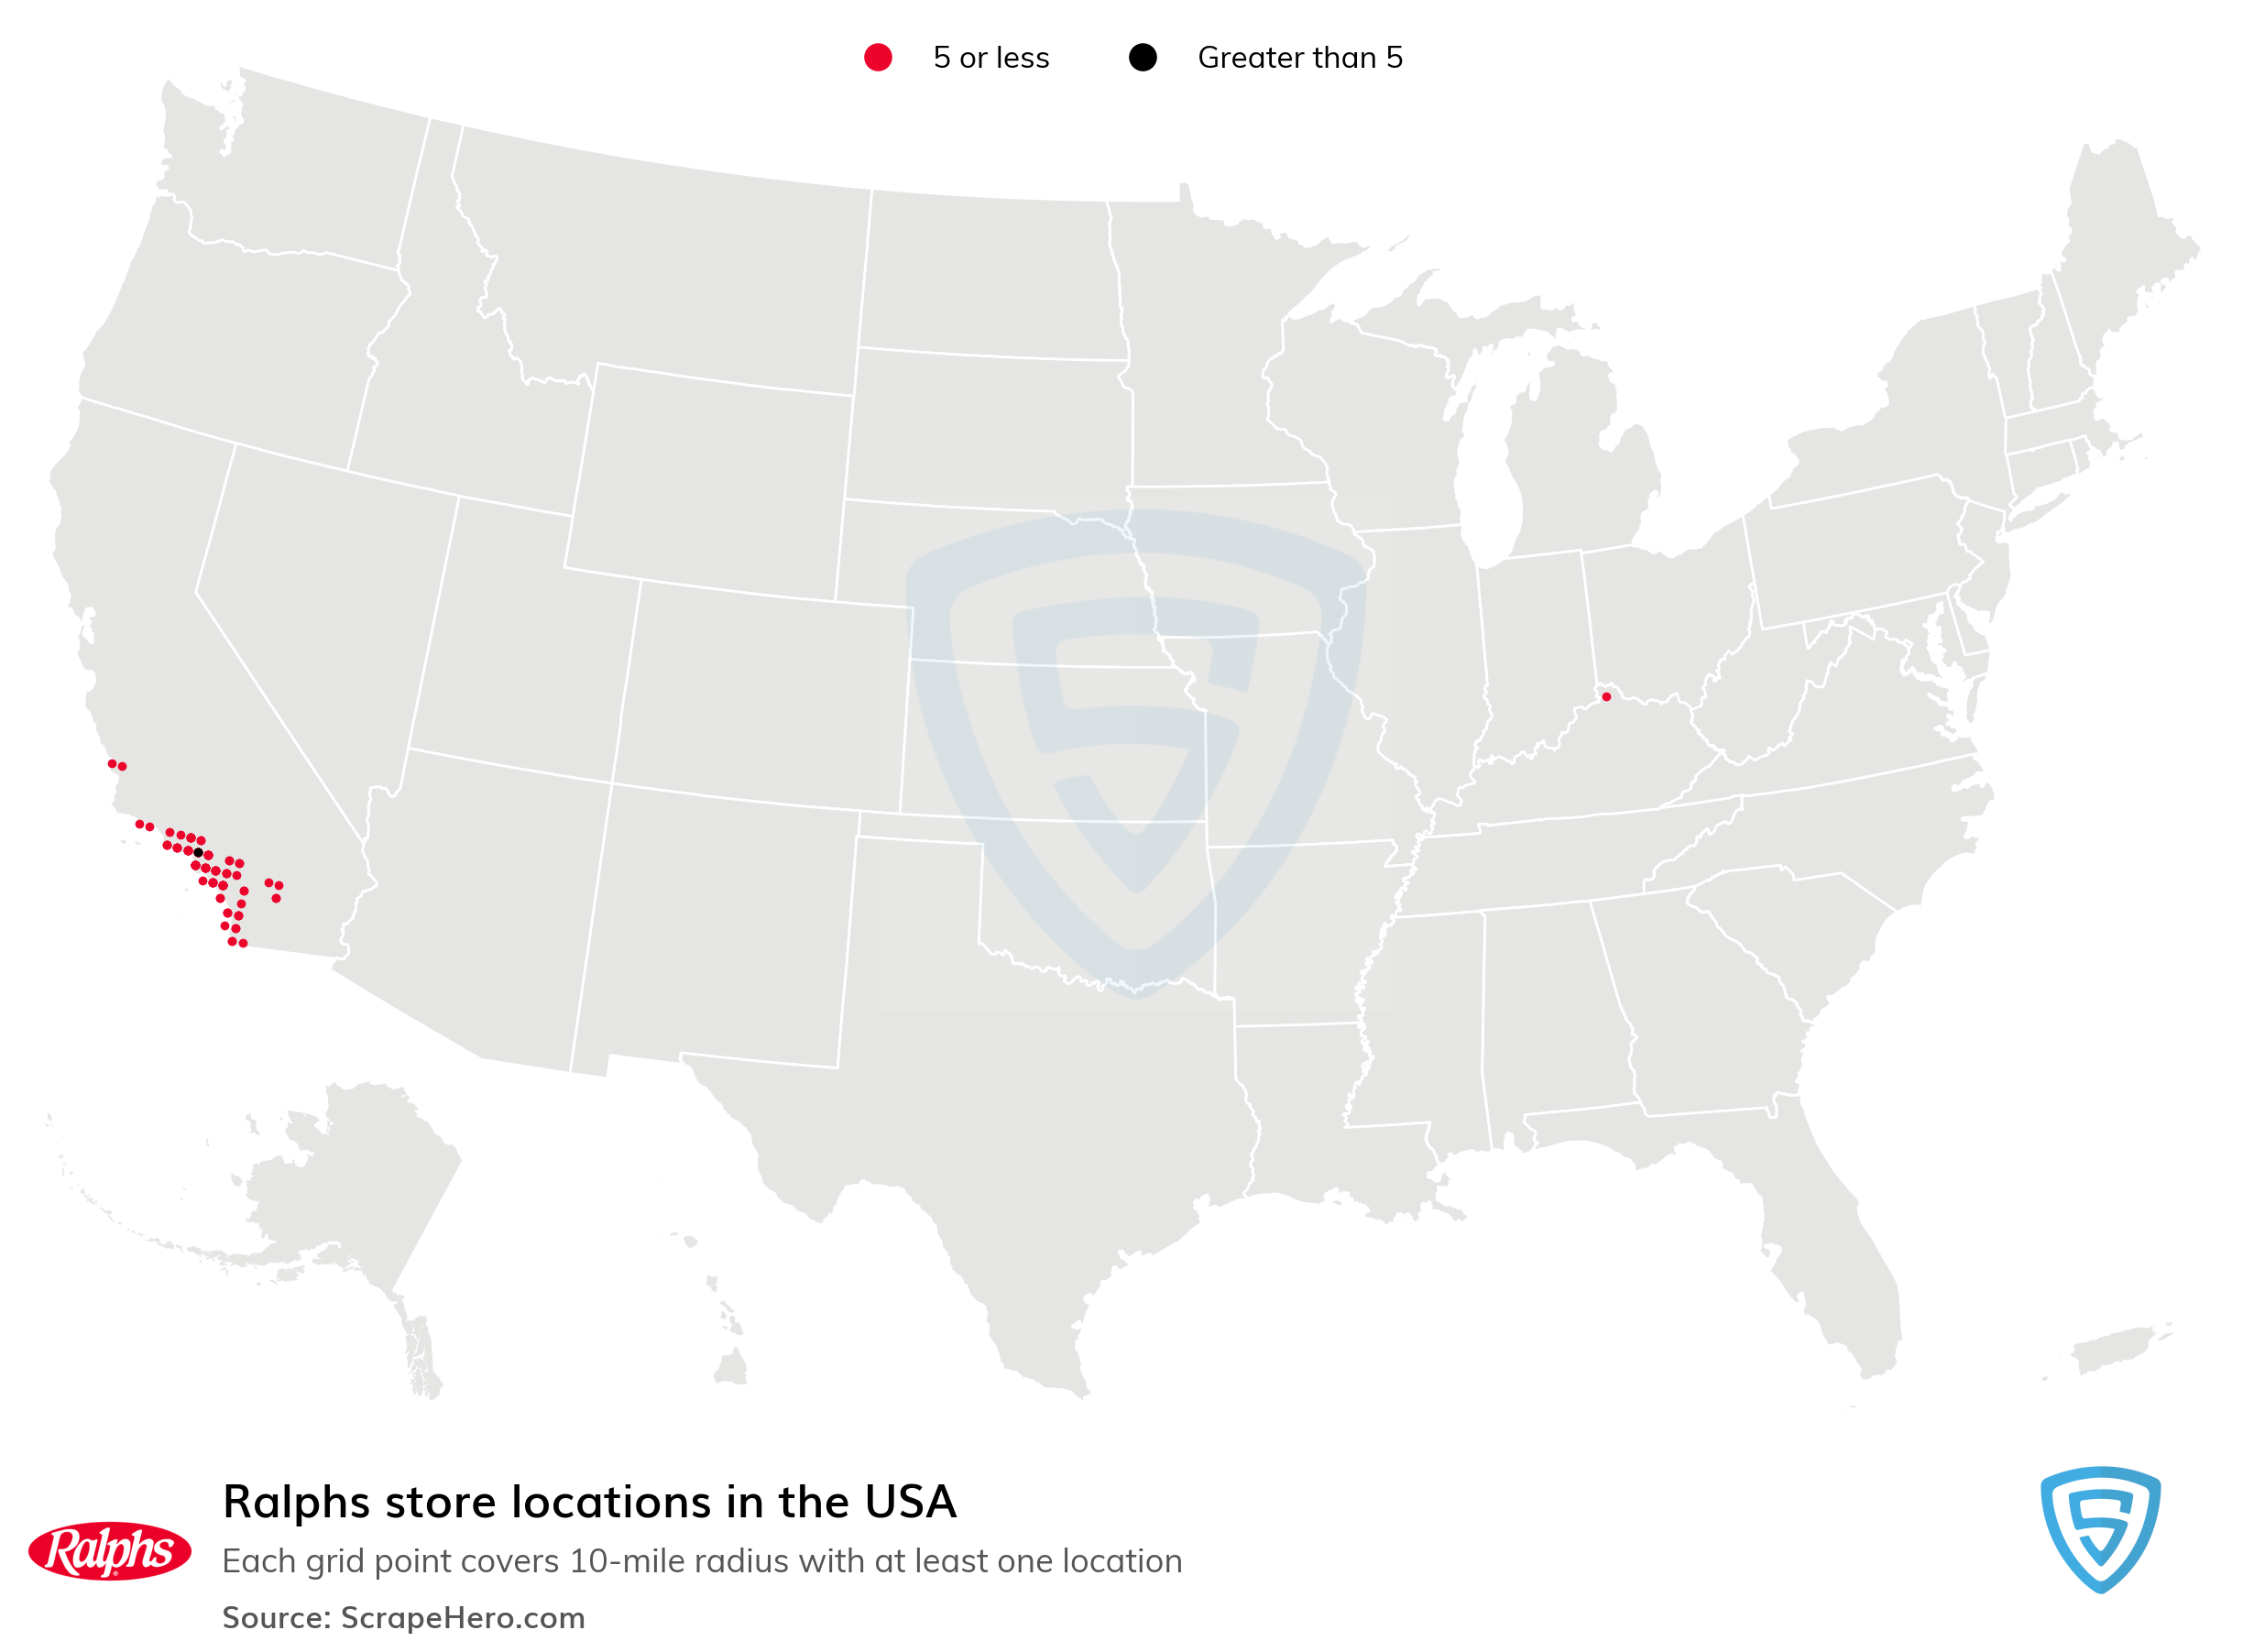 how many ralphs stores are there